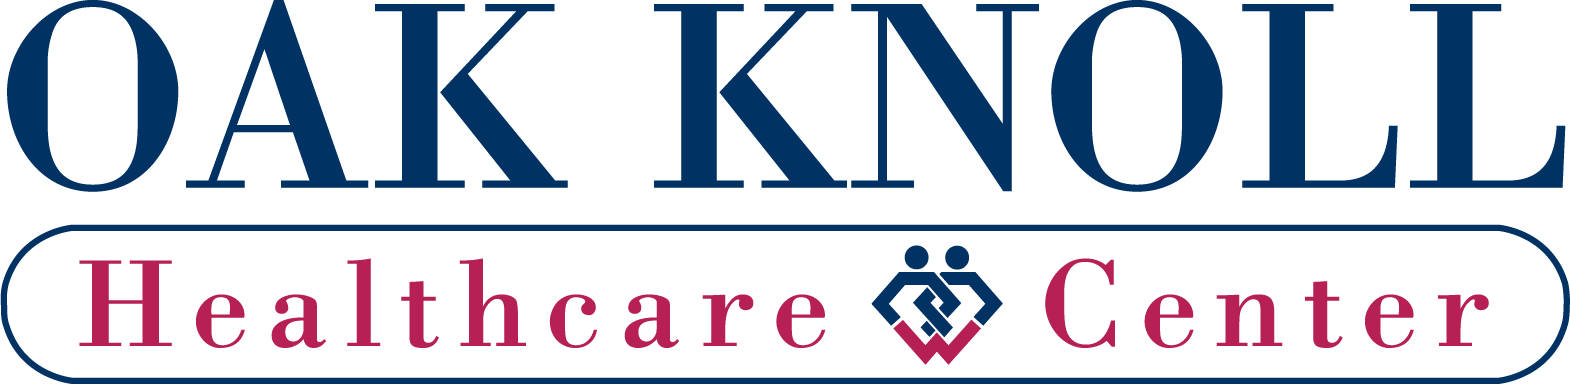 I was impressed with Oak Knoll from day one until the day she returned home., I was impressed with Oak Knoll from day one until the day she returned home. All of the nursing staff were very caring and kept me up to date with how my mom was doing.